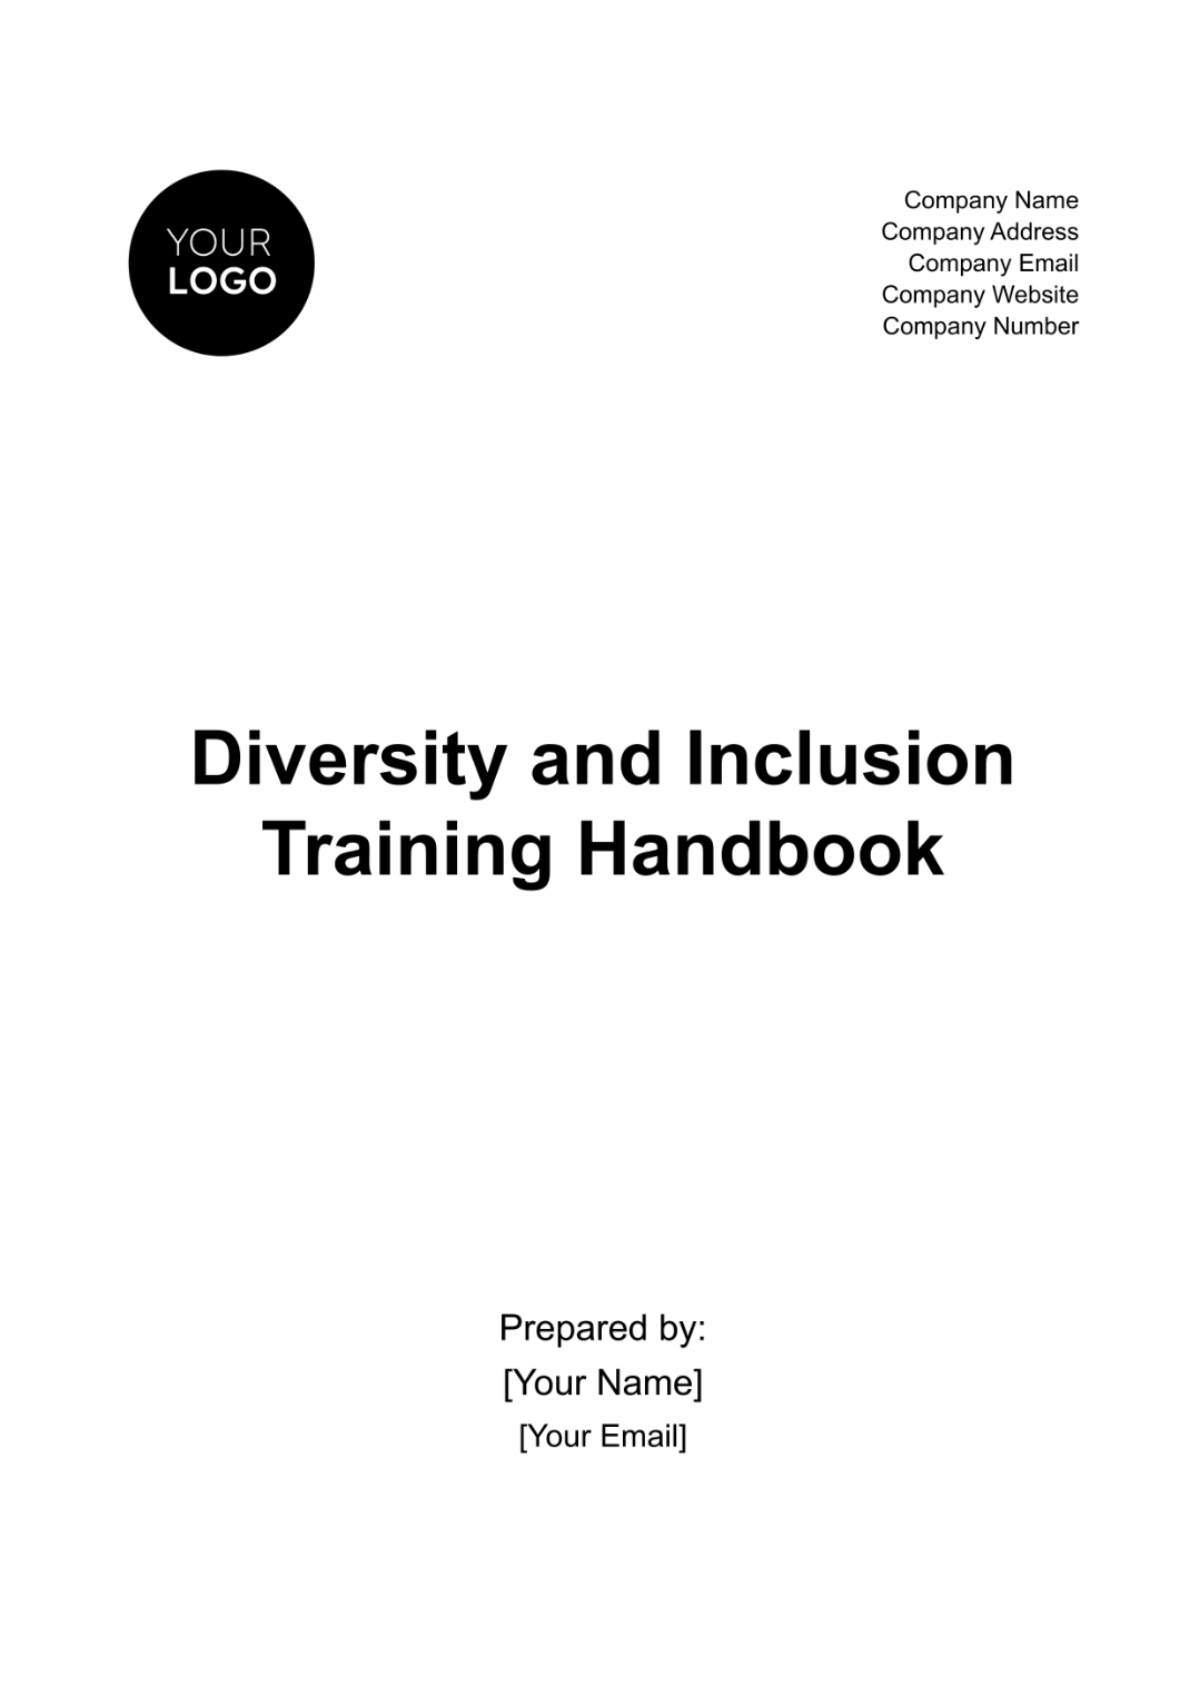 Free Diversity and Inclusion Training Handbook HR Template